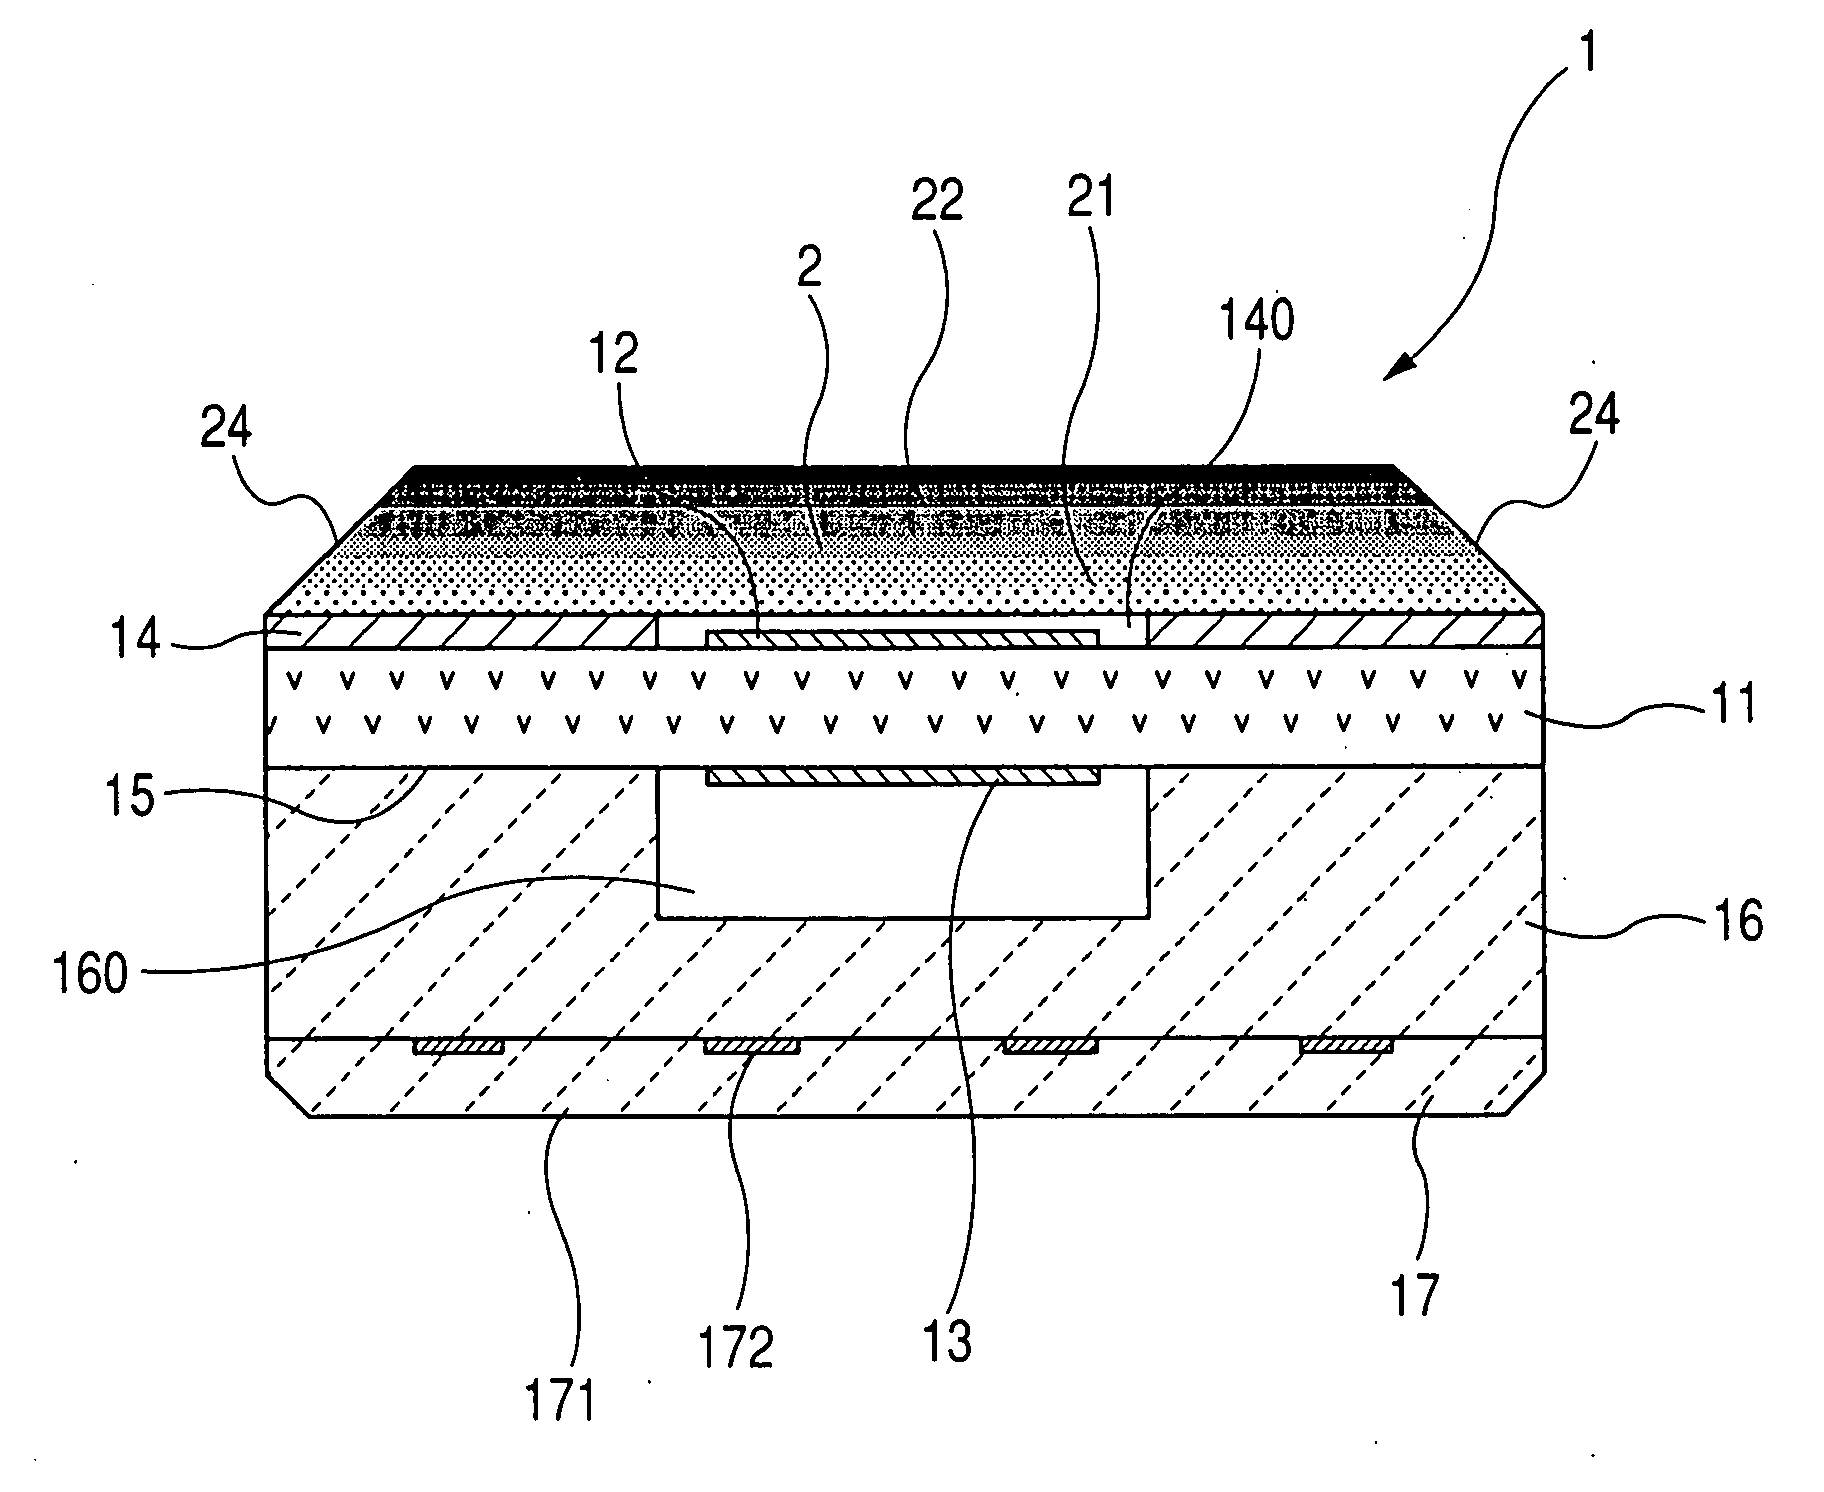 Gas sensor element with increased durability and related manufacturing method